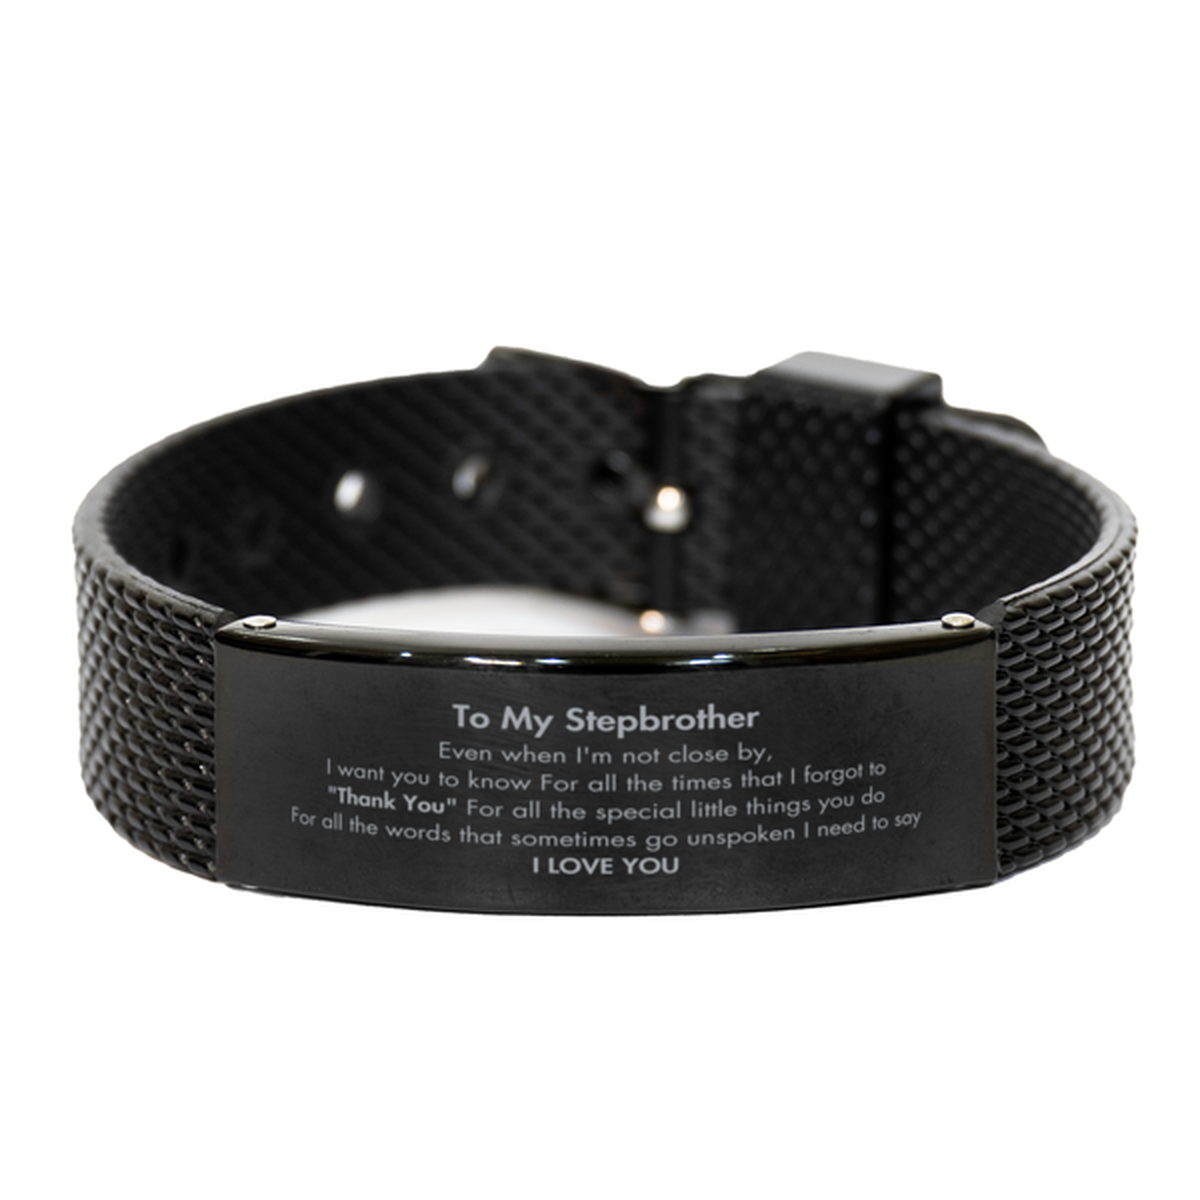 Thank You Gifts for Stepbrother, Keepsake Black Shark Mesh Bracelet Gifts for Stepbrother Birthday Mother's day Father's Day Stepbrother For all the words That sometimes go unspoken I need to say I LOVE YOU